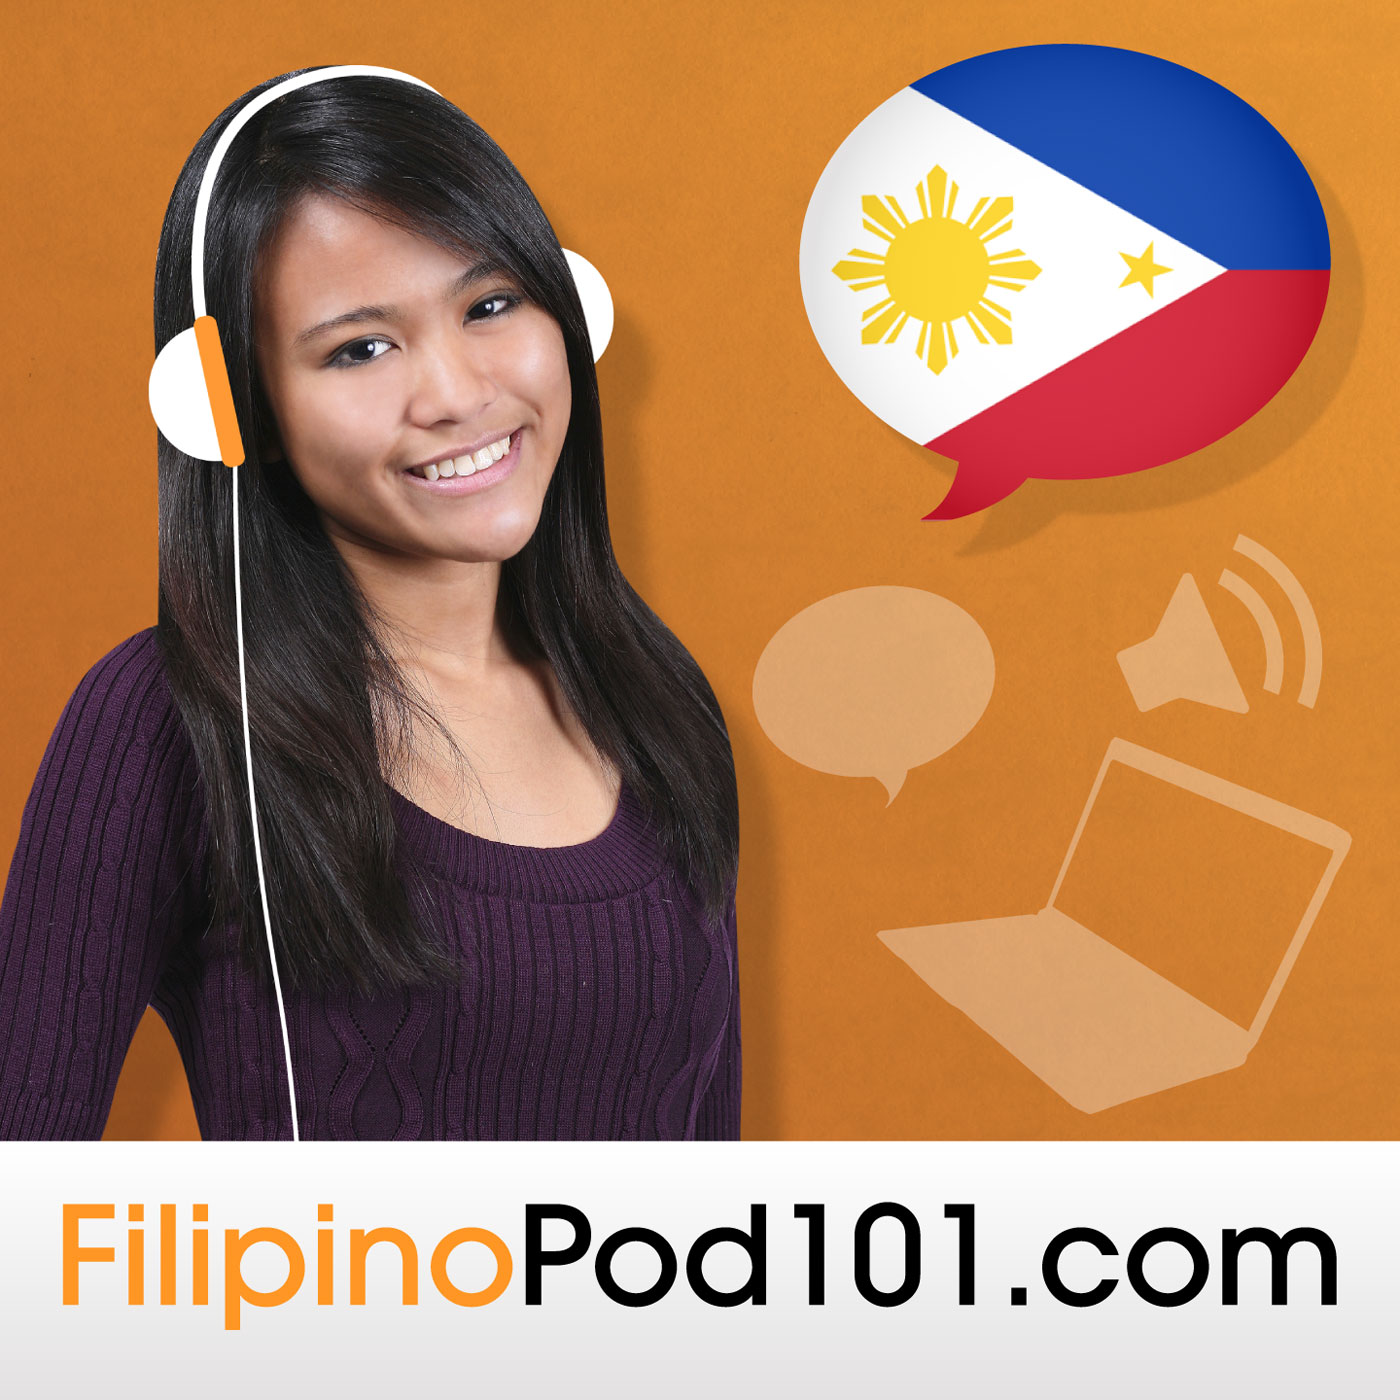 News #121 - Your Secret FilipinoPod101 Deal To Mark The ...